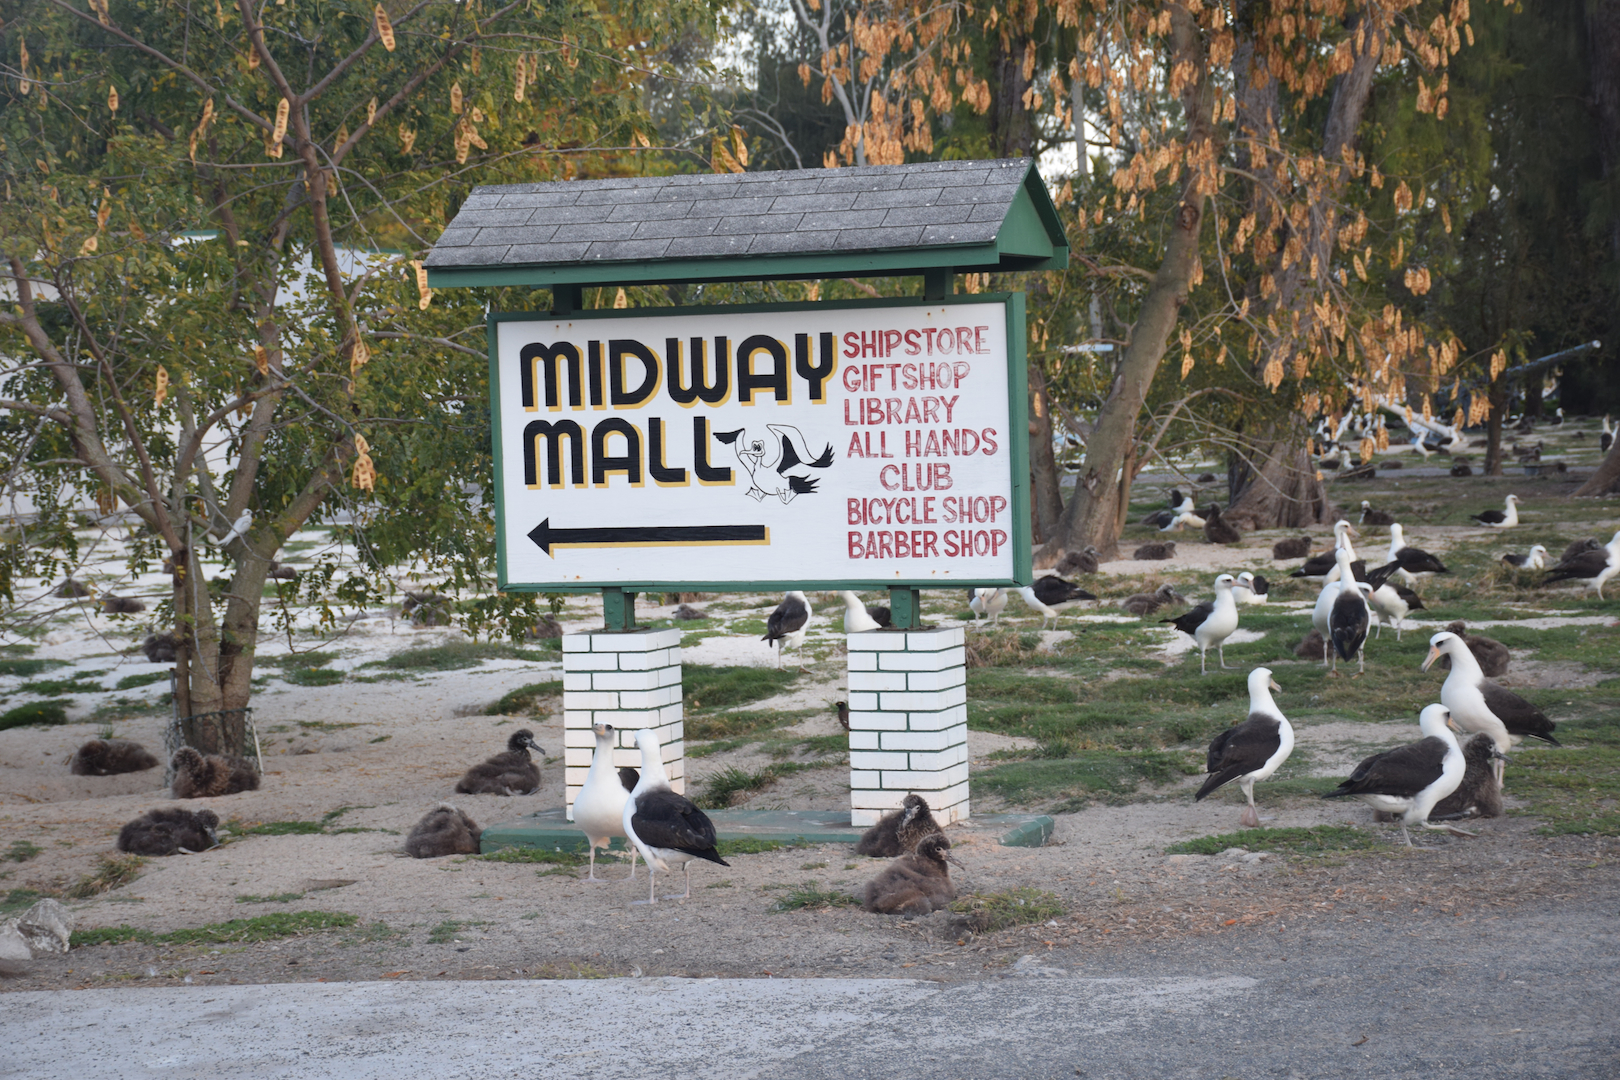 Midway, Mall, shops, things to do, albatross, Atoll, Northwestern Hawaiian Islands, Barber Shop